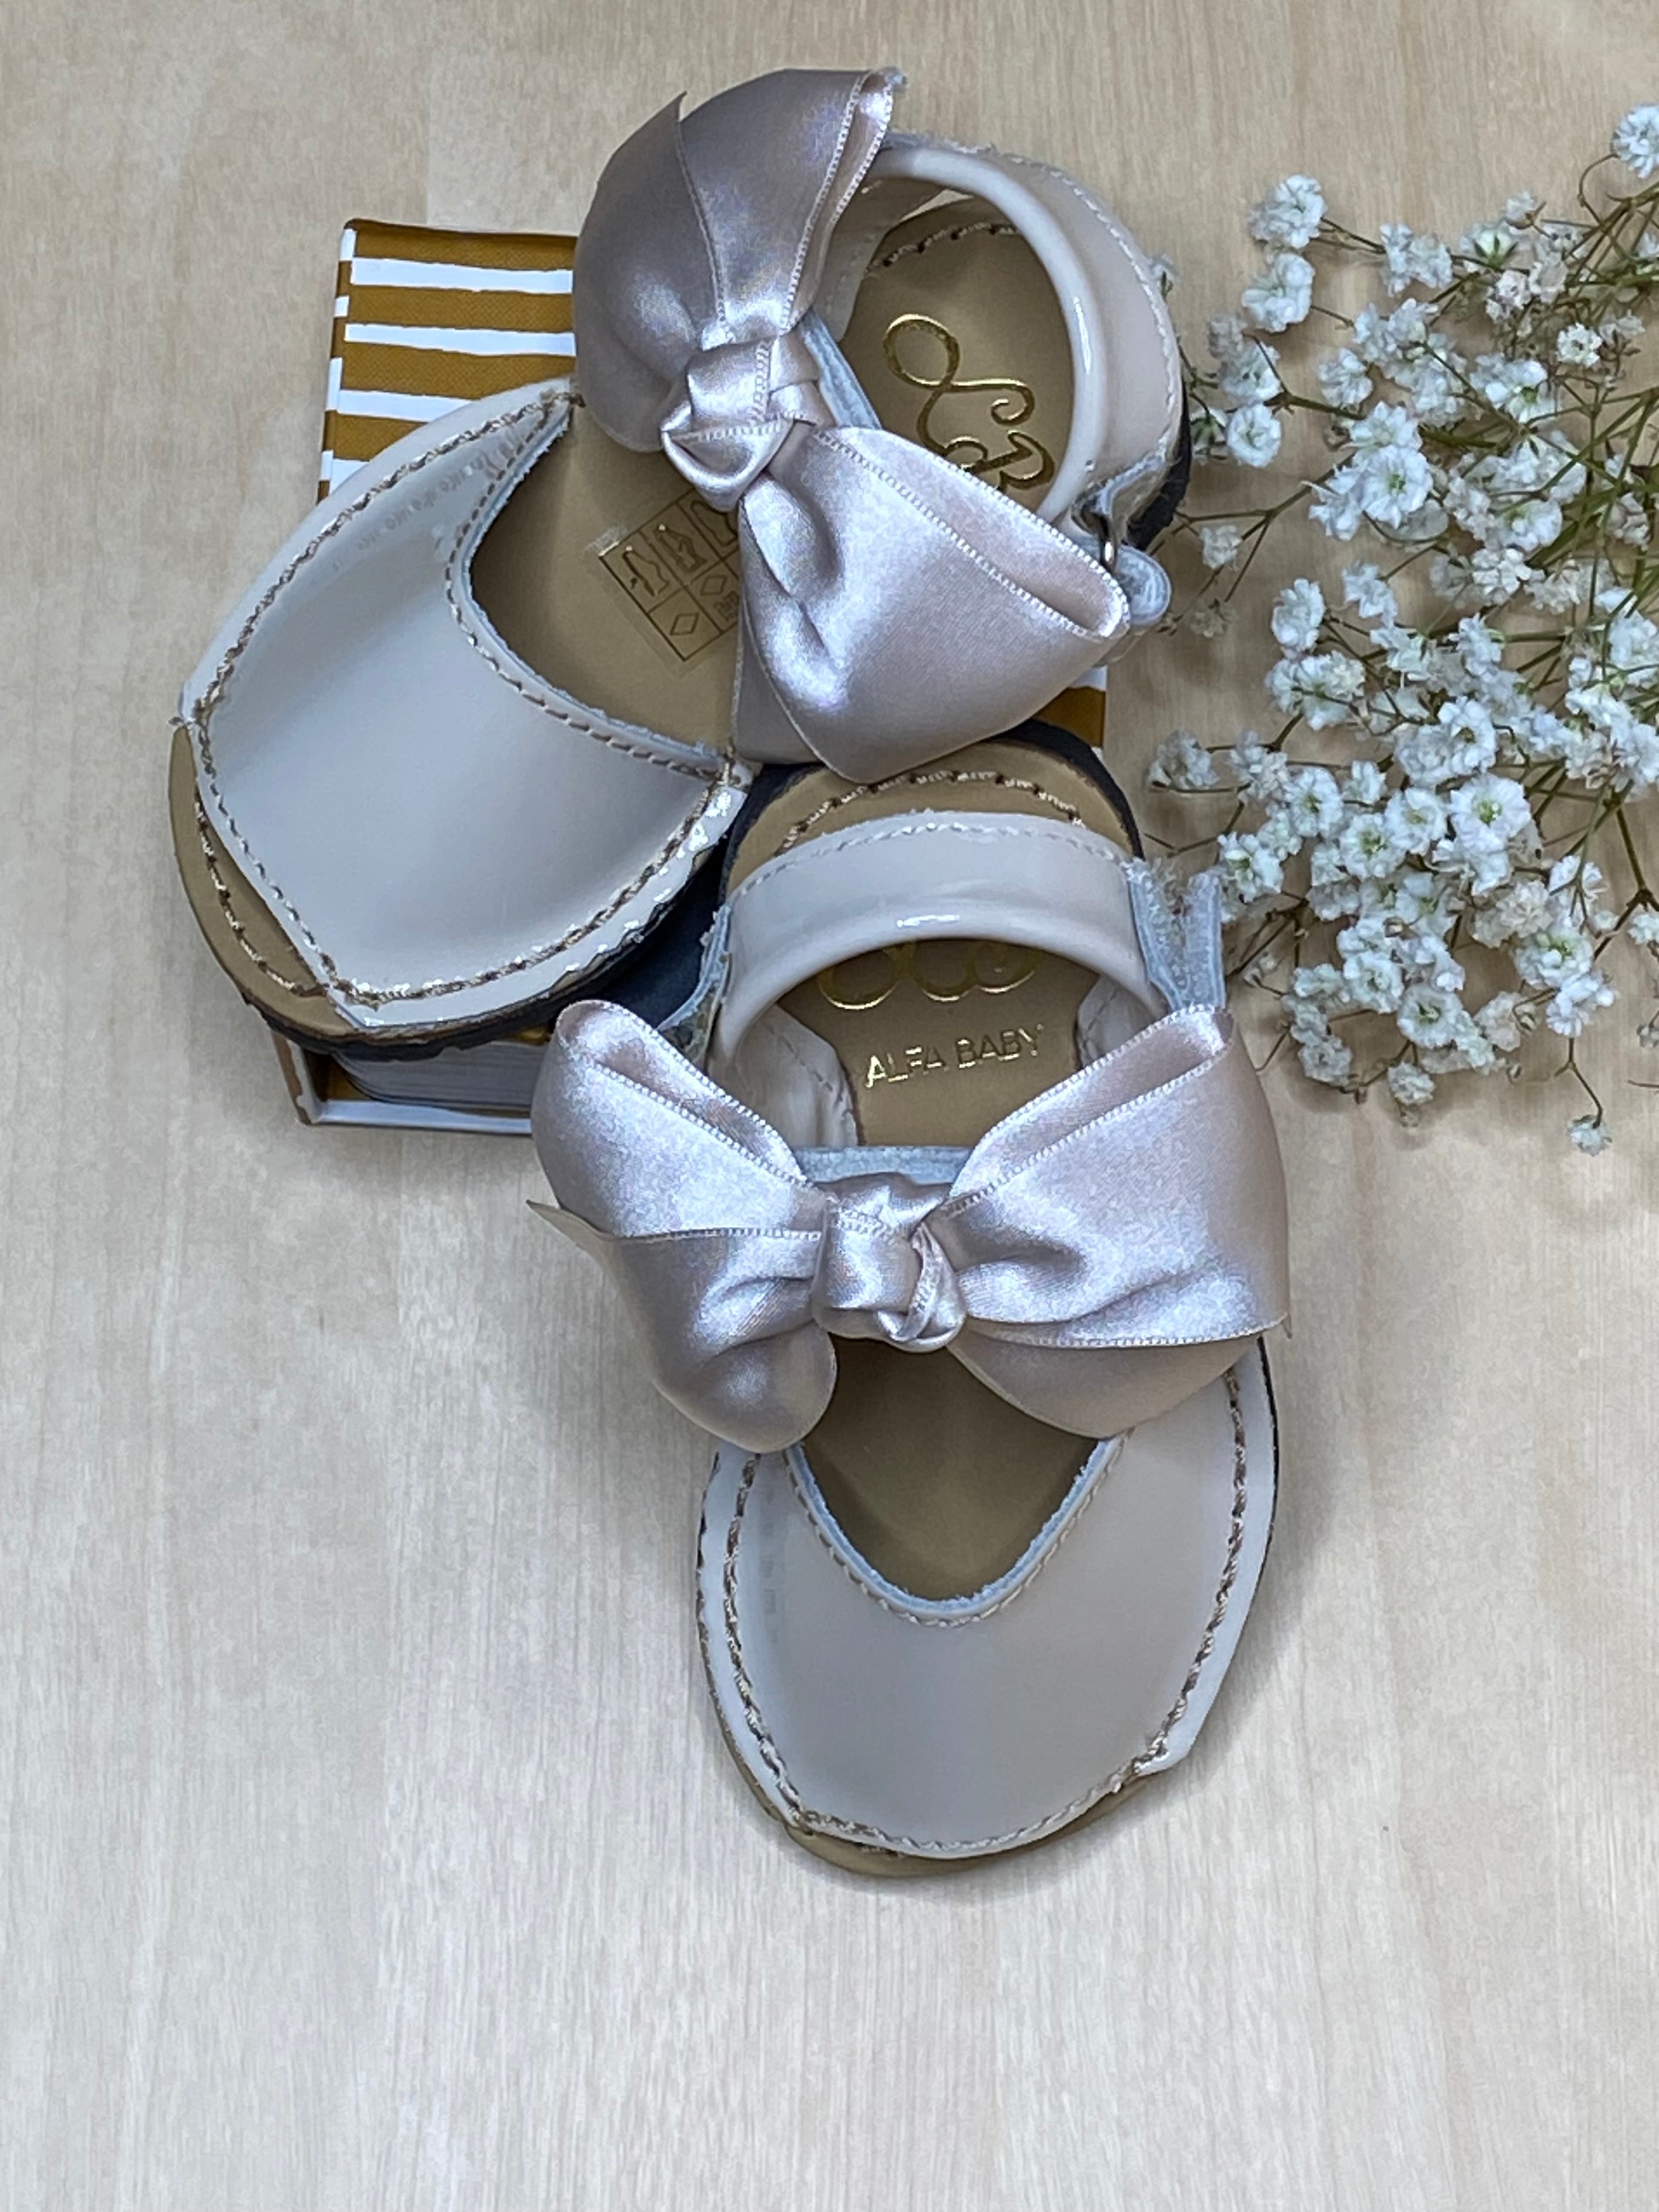 Sandy Beach Satin Bow Sandals-Toddler Girl Shoes